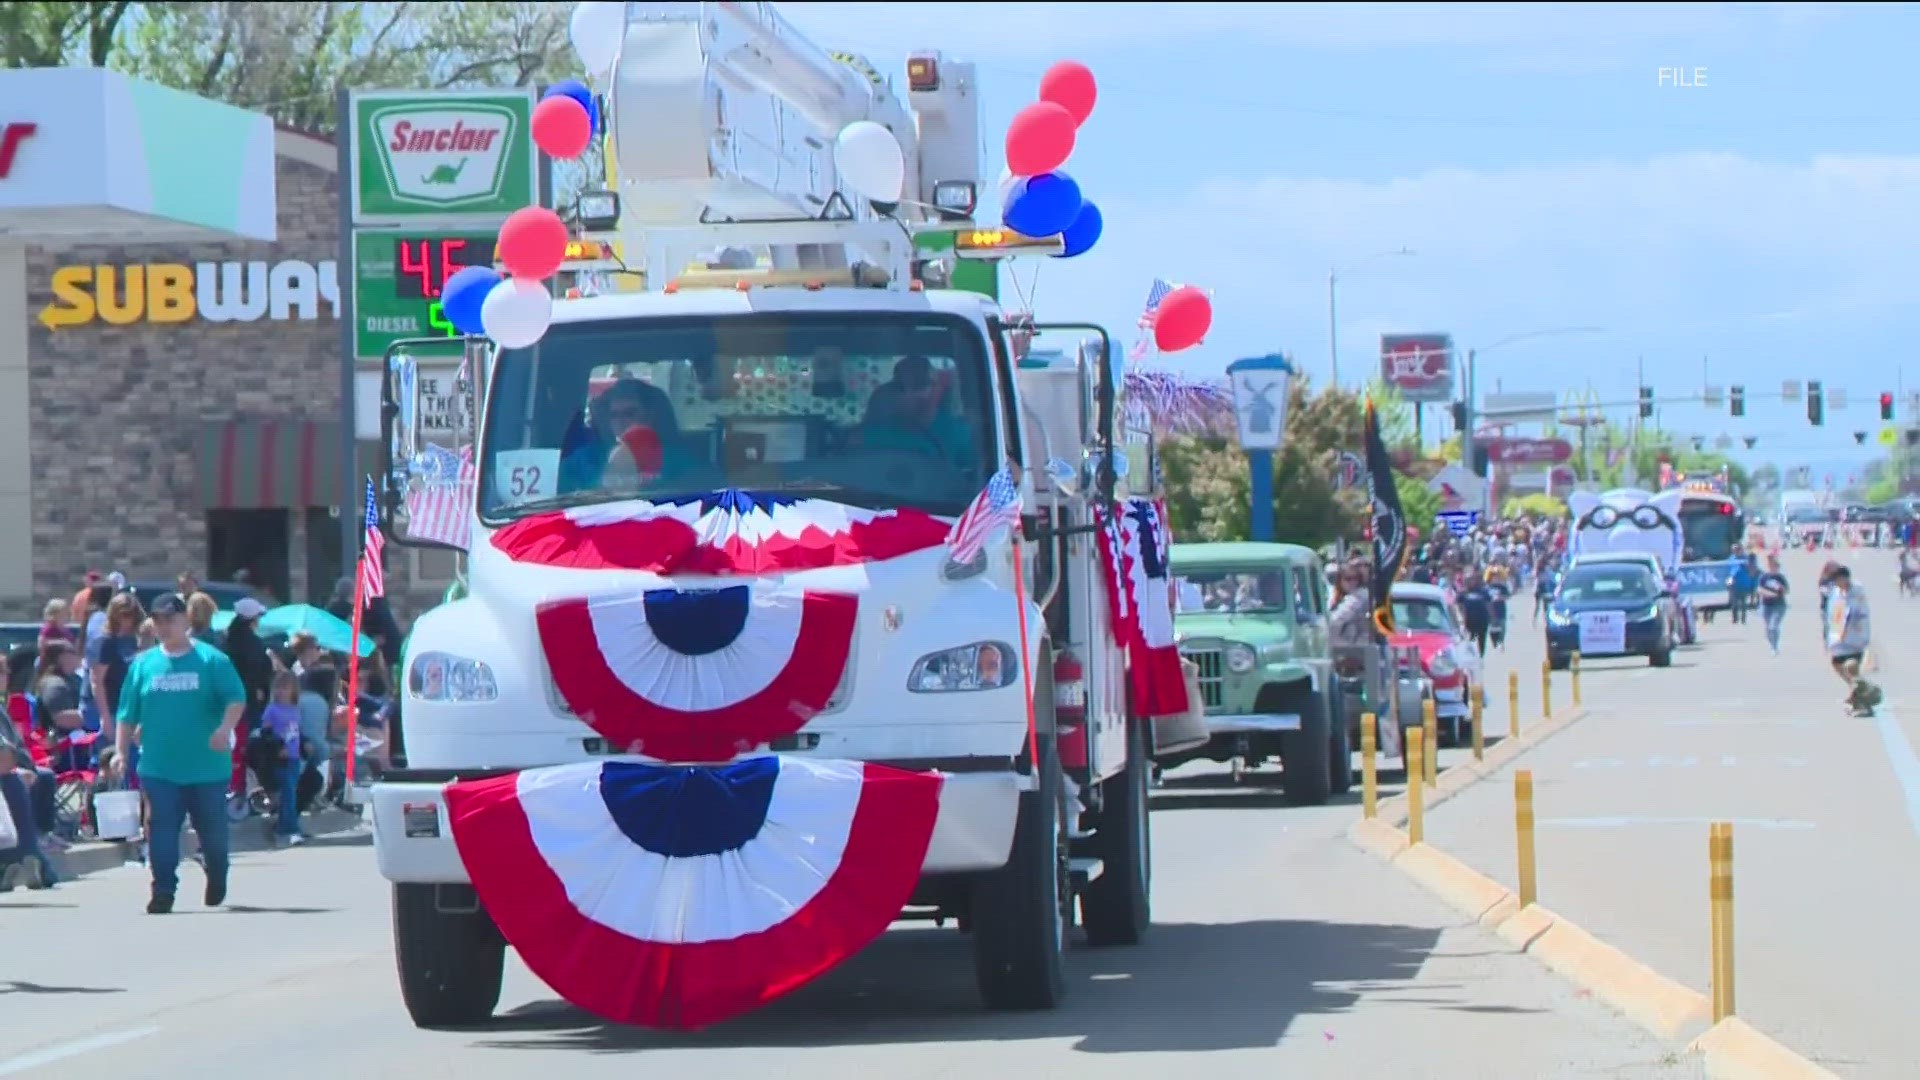 The theme of this year’s parade is “The Heart of America” and the event will include floats, horses, marching bands, antique cars and more.